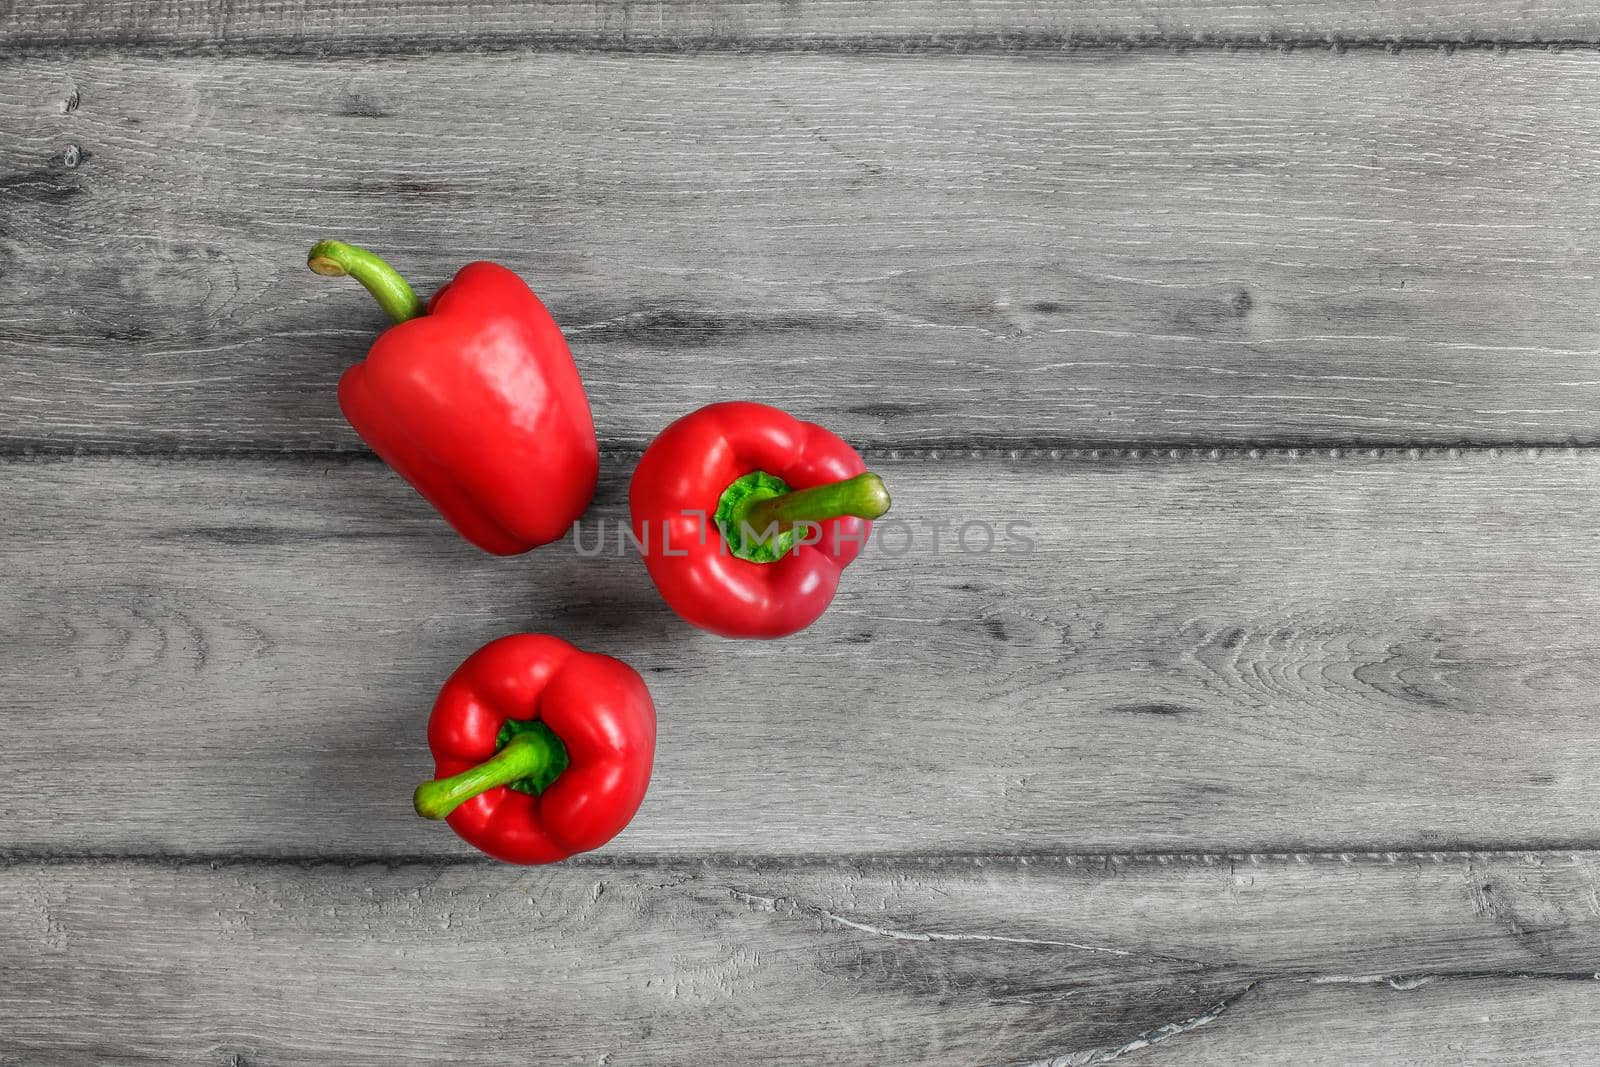 Tabletop view - three bright red bell peppers on gray wood desk